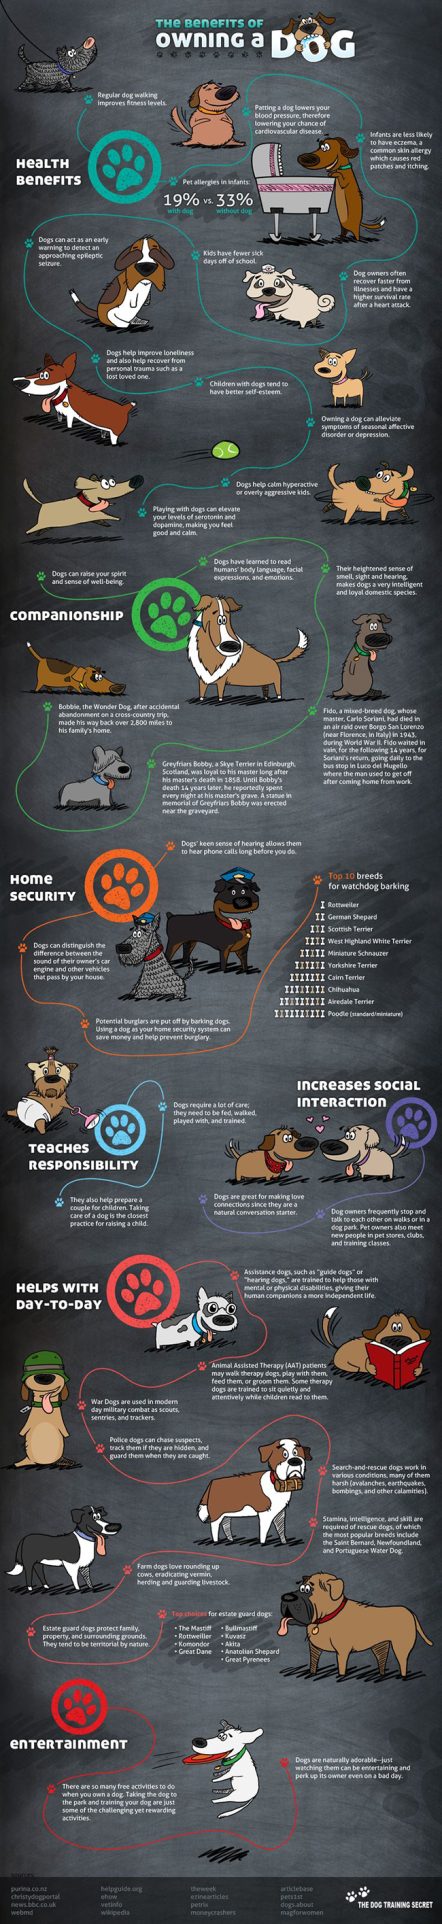 The 38 Benefits of Owning a Dog